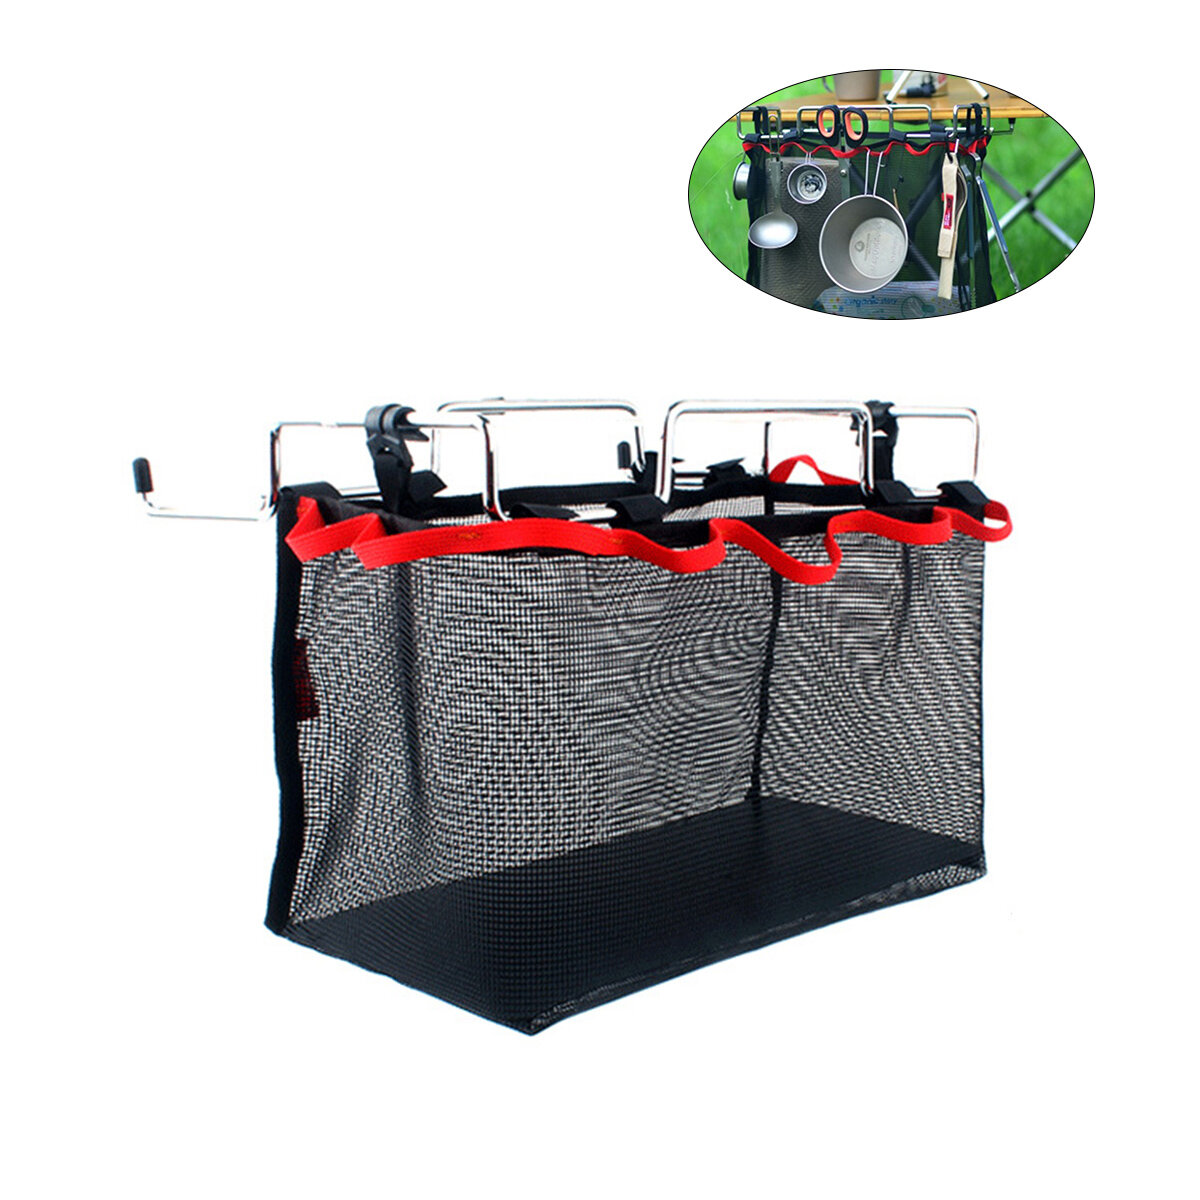 Campleader Outdoor Picnic Camping Storage Net Bag Stuff Storage Mesh Pack Kitchen Portable Folding Table Hanging Net